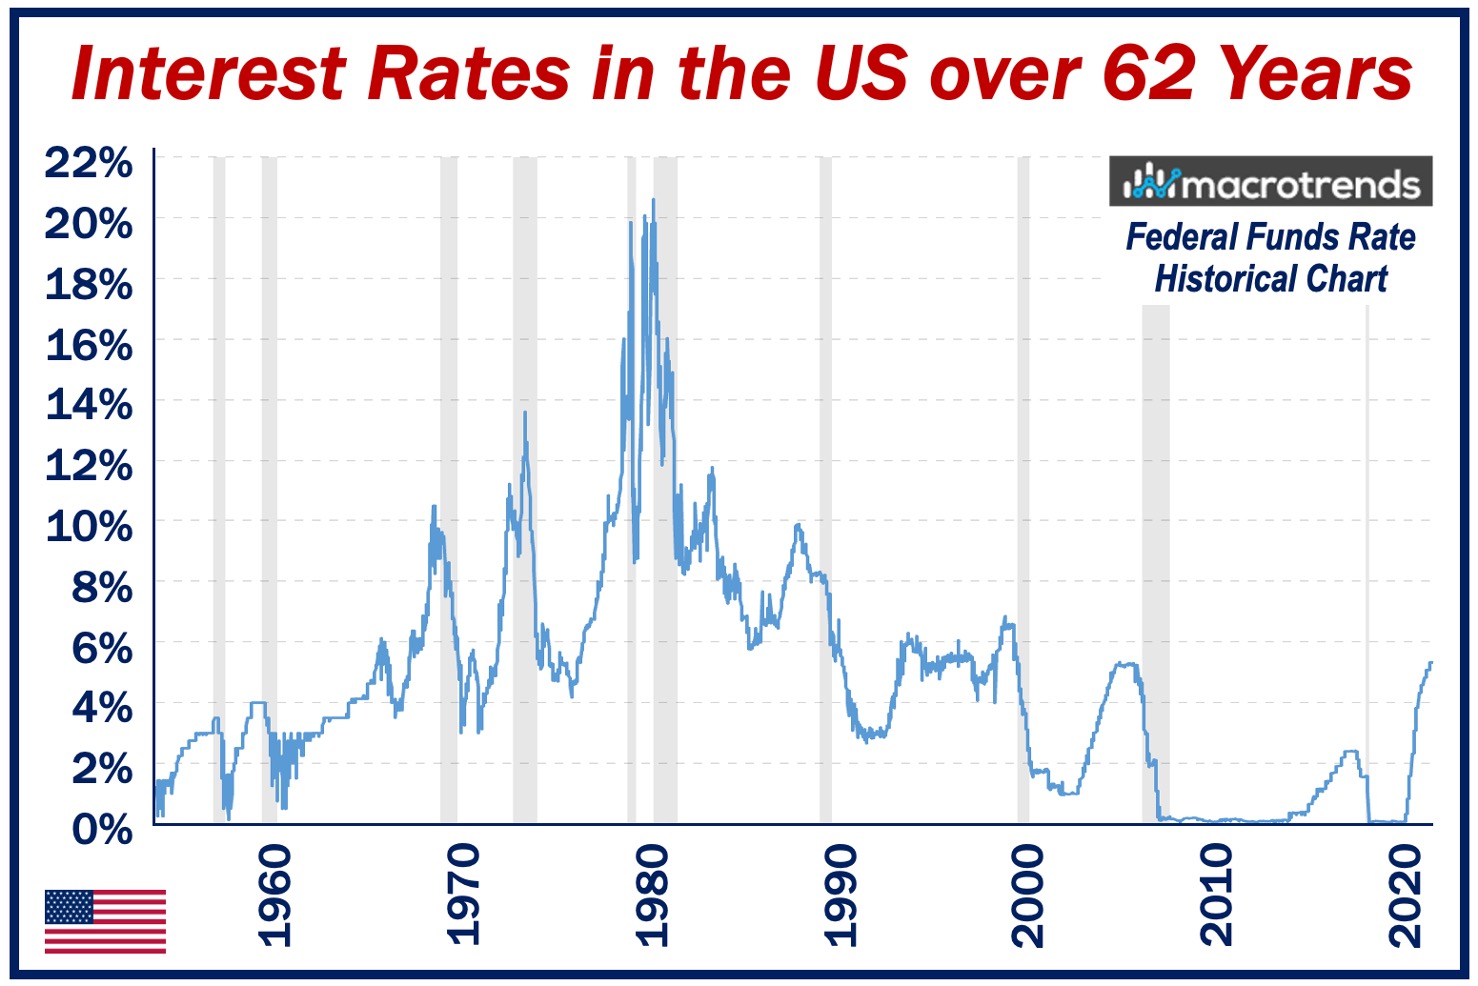 Federal Funds Rate Chart - 62 Years